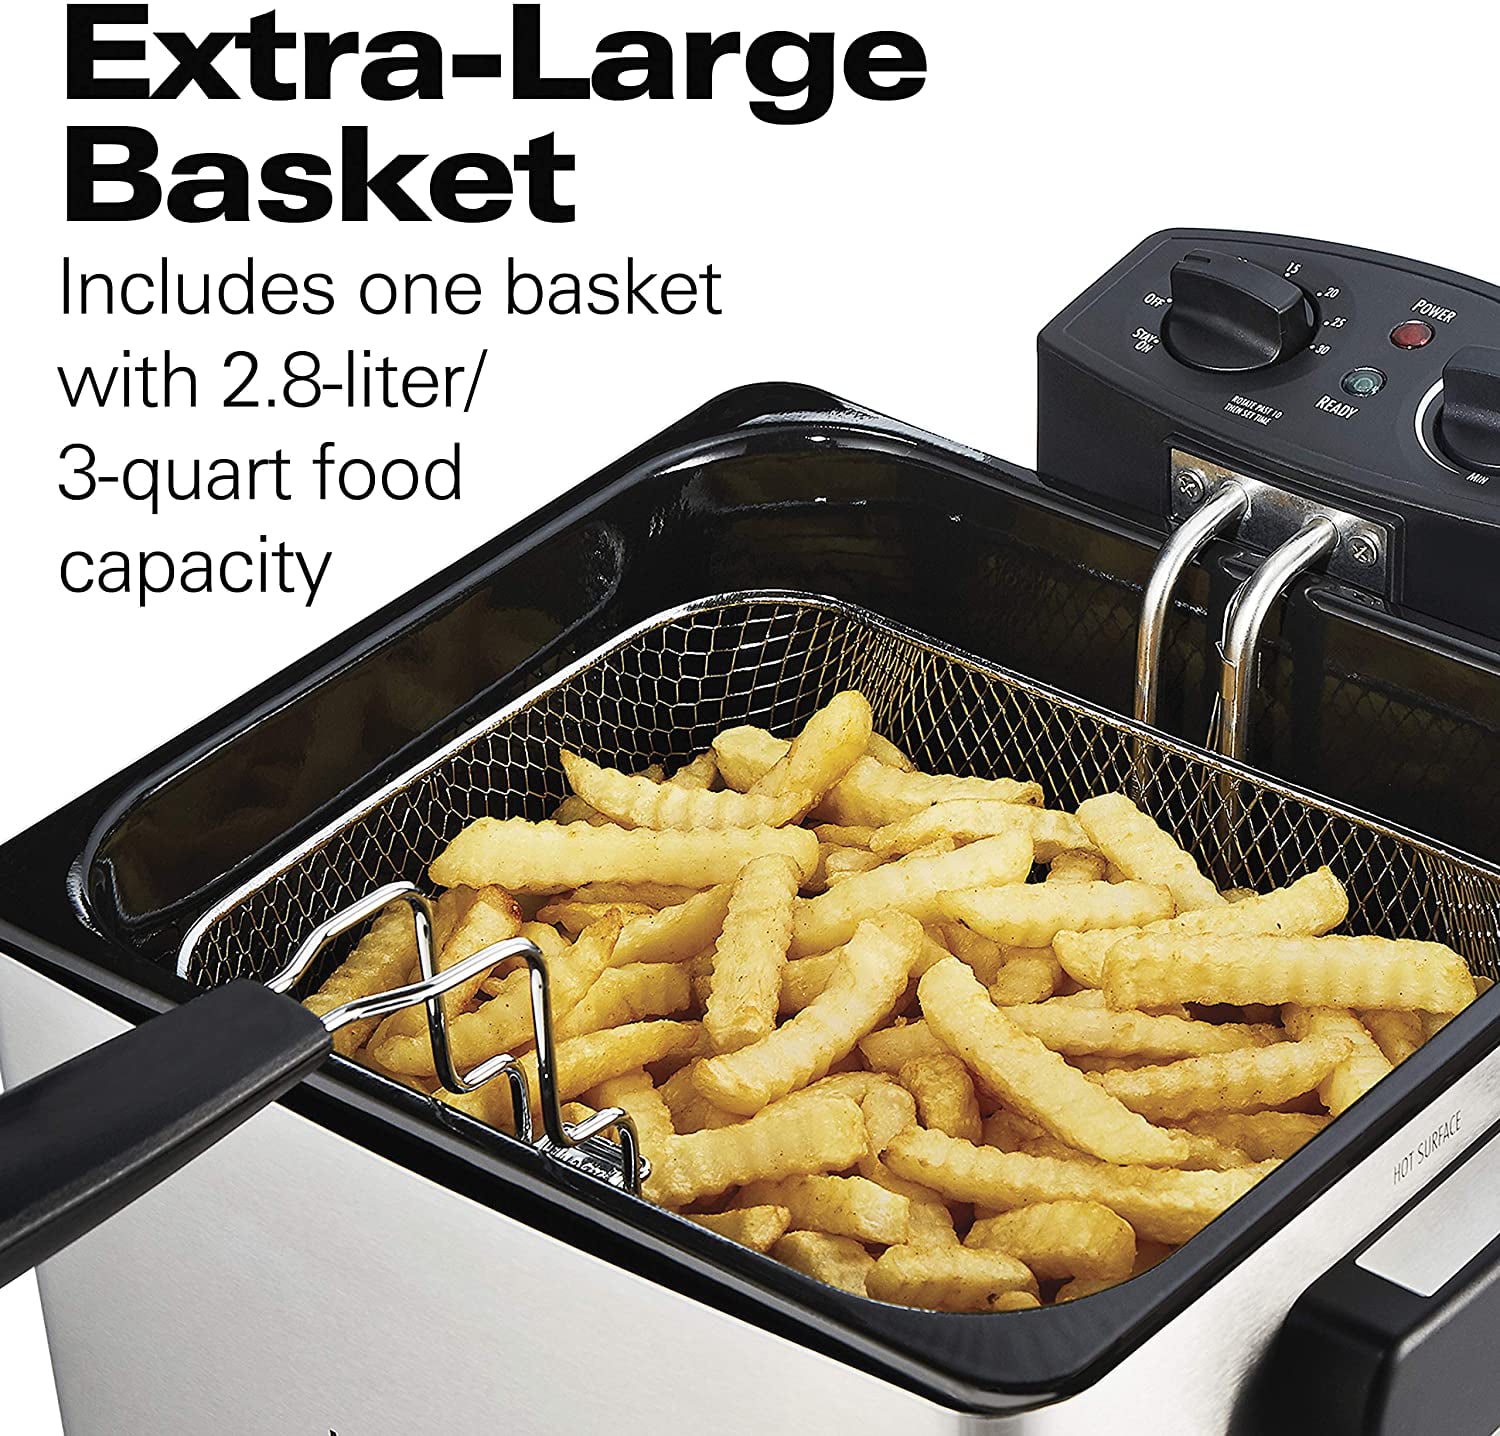 Deep Fryer, 4.5 Liters/19 Cup Oil Capacity Professional-Style with